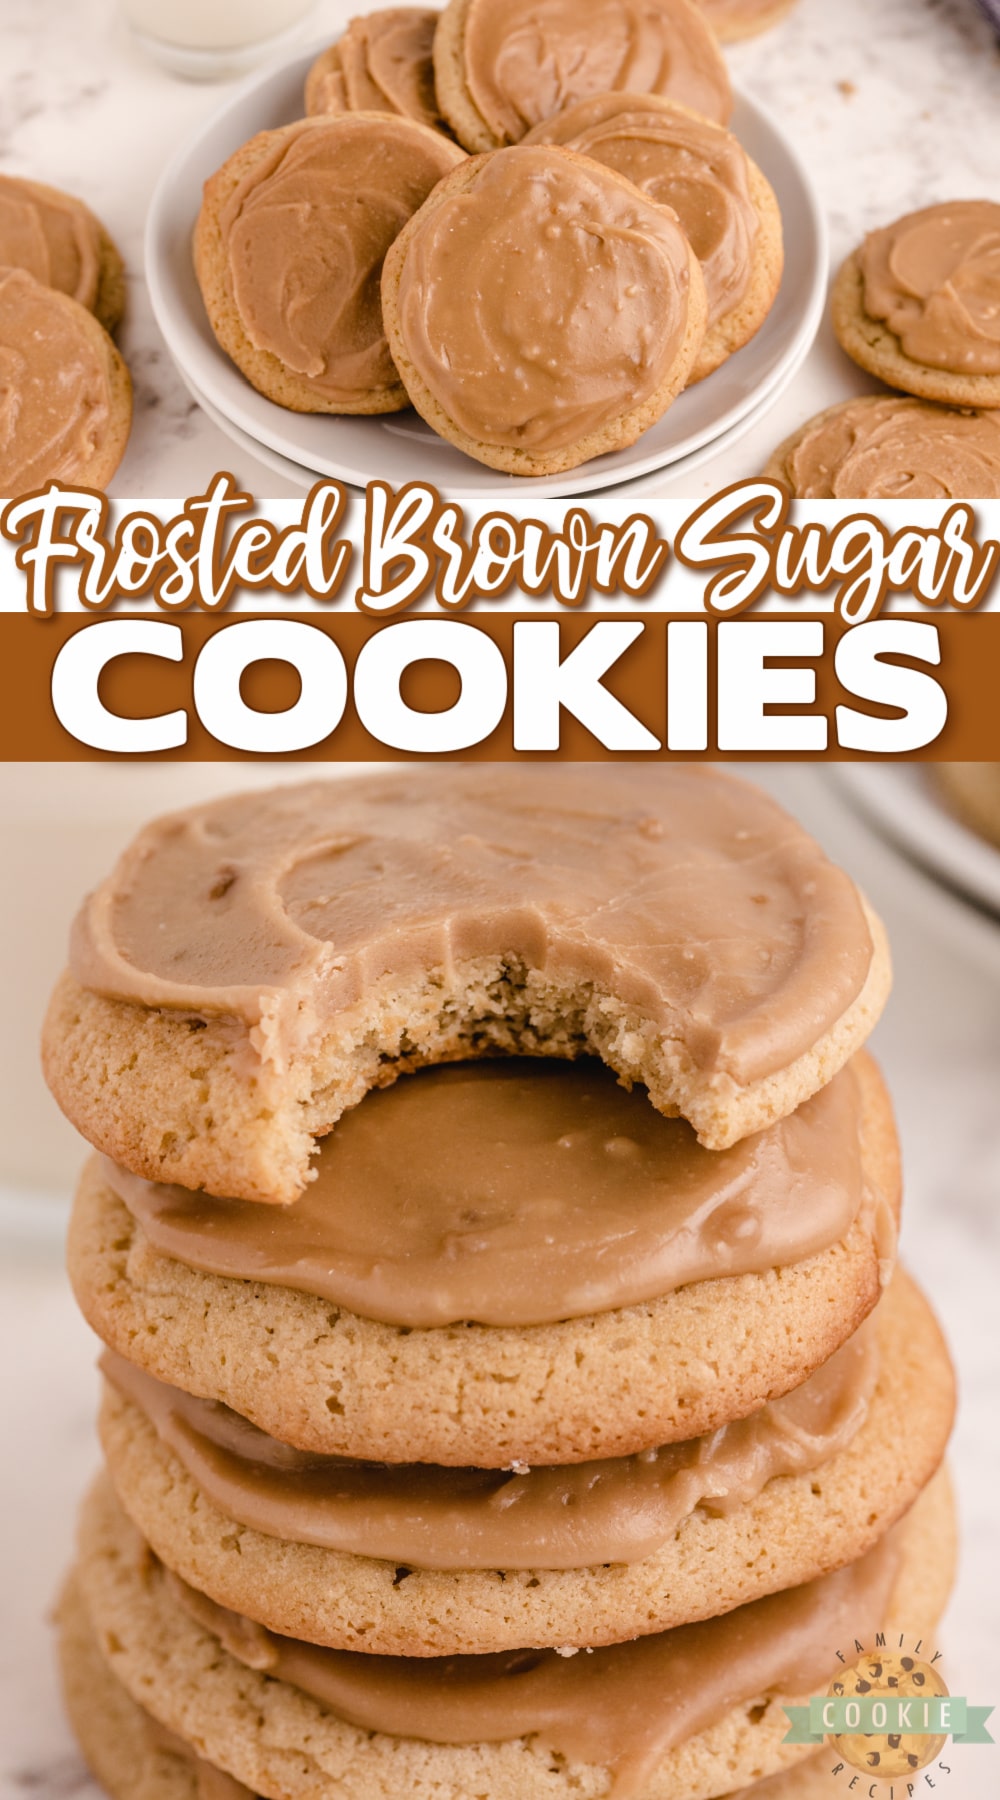 Frosted Brown Sugar Cookies are soft and chewy with a simple brown sugar frosting on top. Easy cookie recipe with a rich brown sugar flavor that is absolutely delicious! via @buttergirls